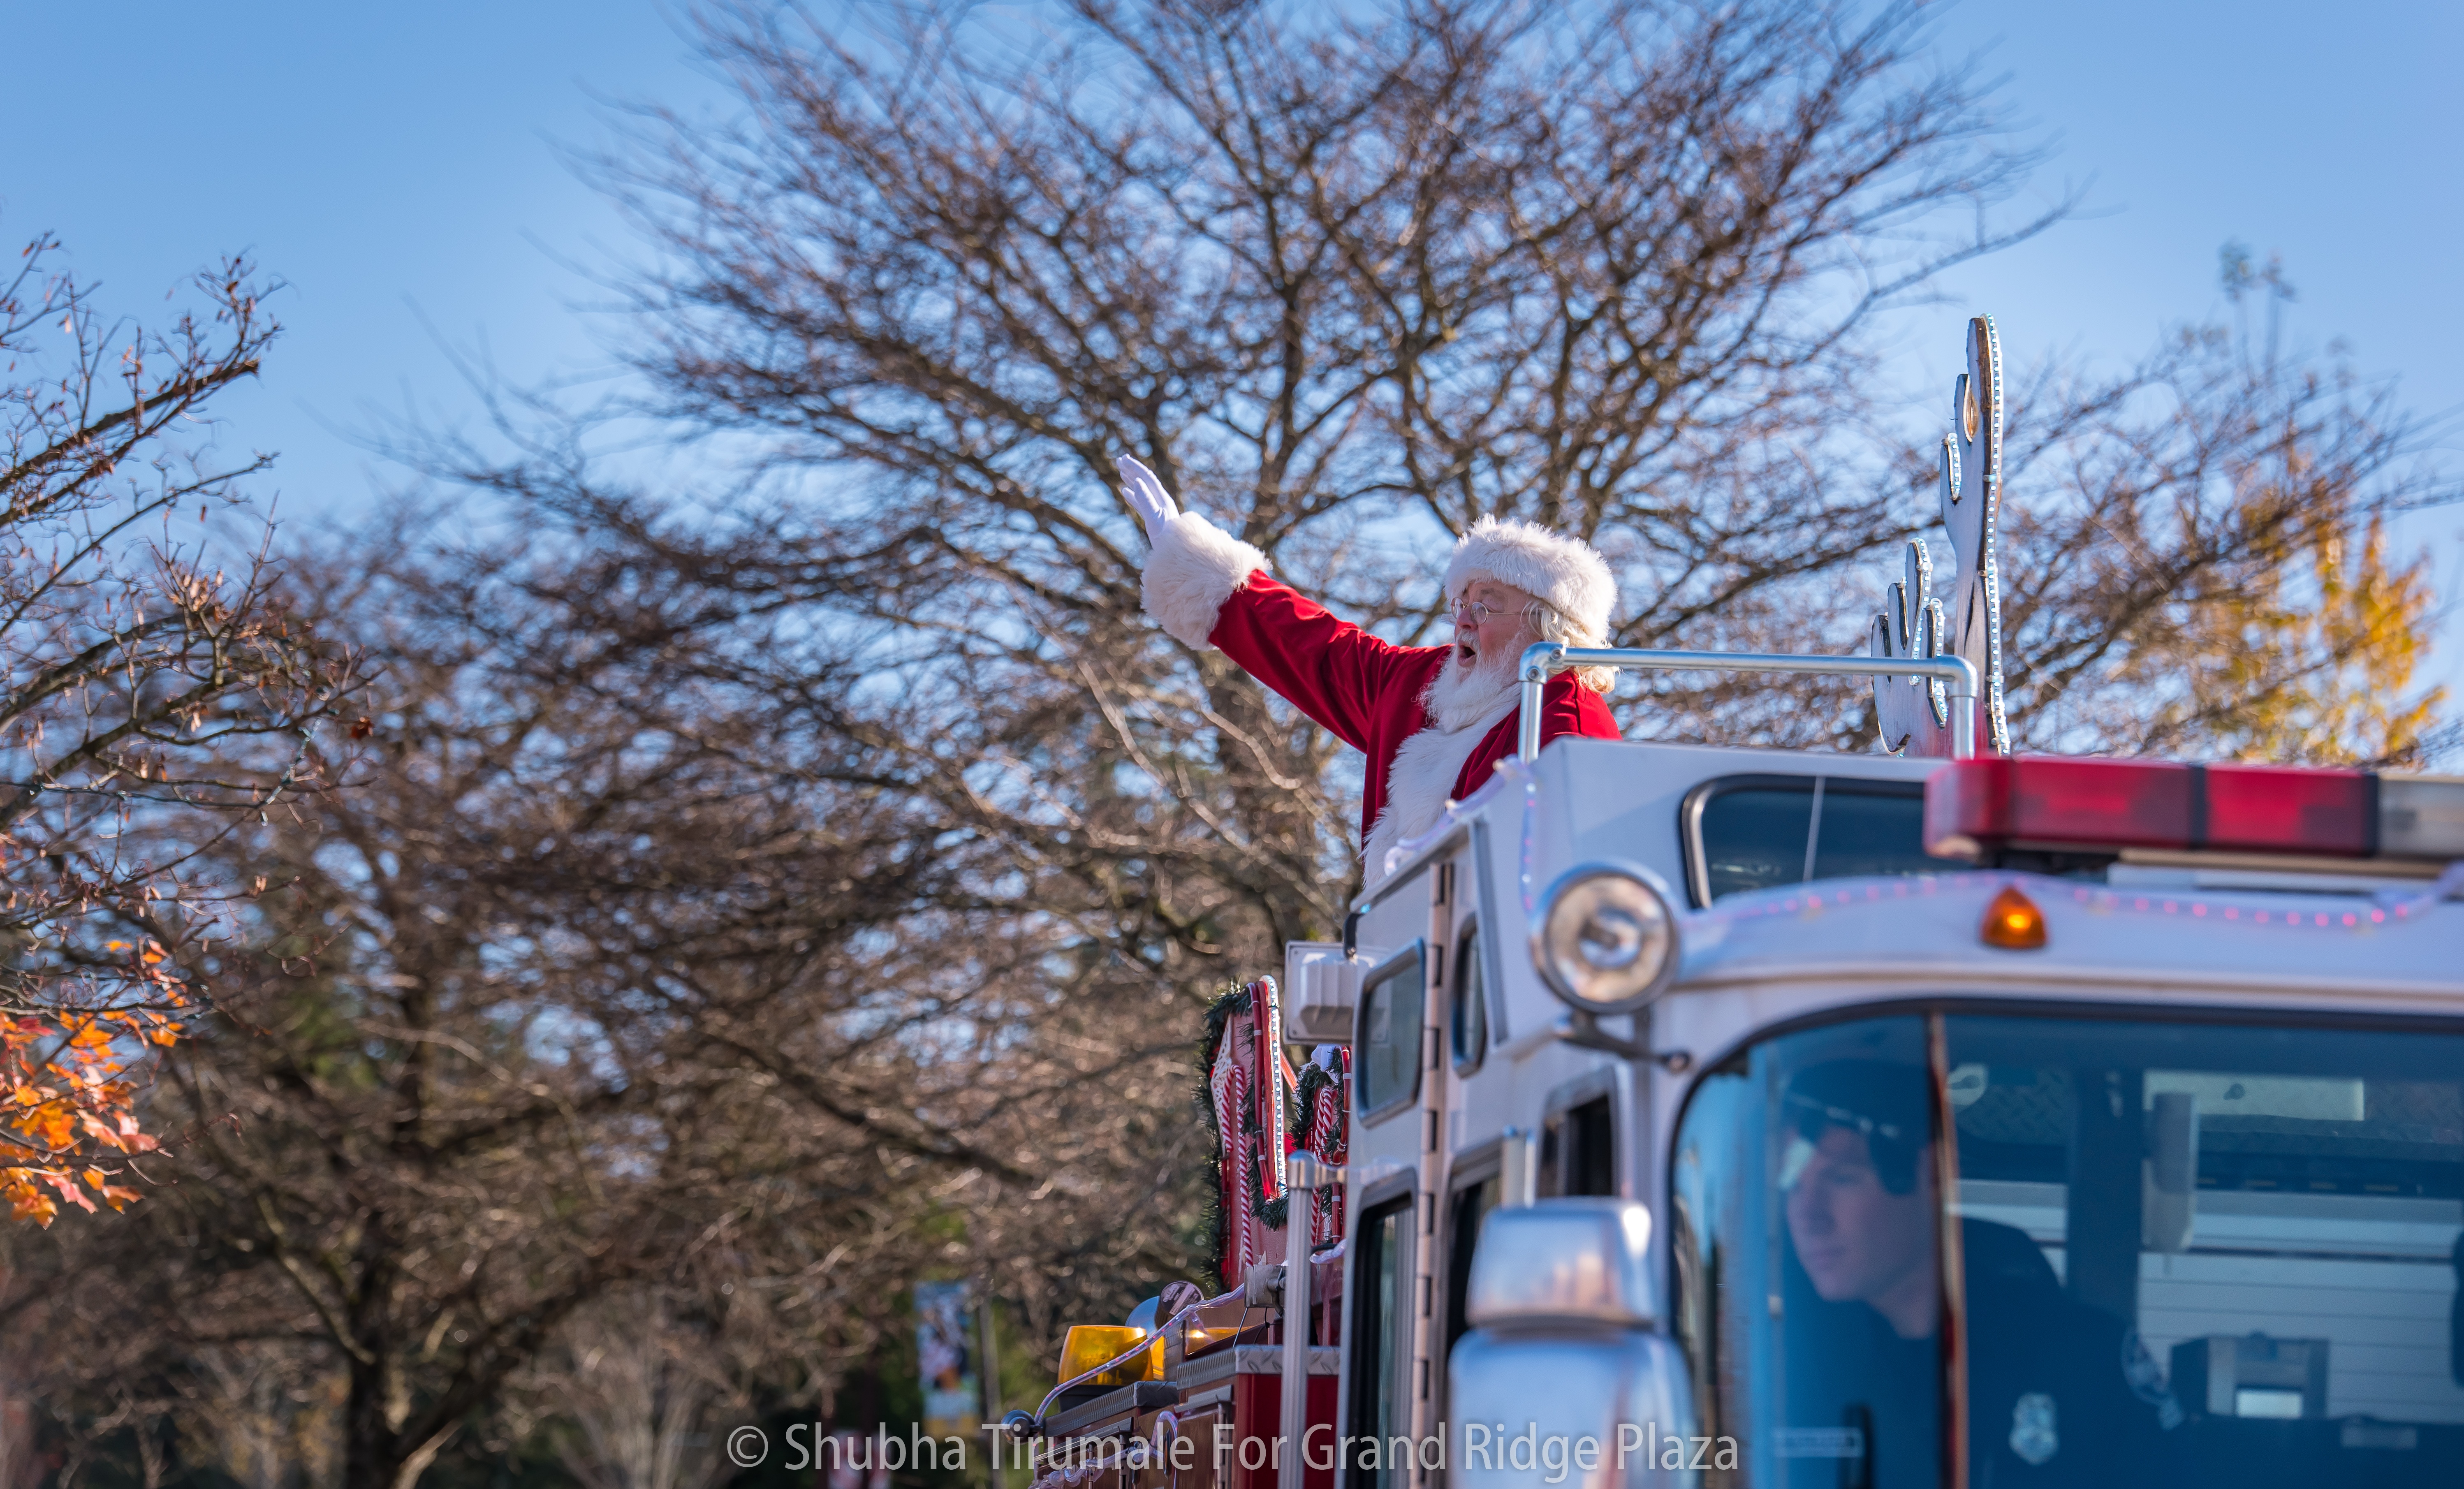 Santa waving from the top of a firetruck